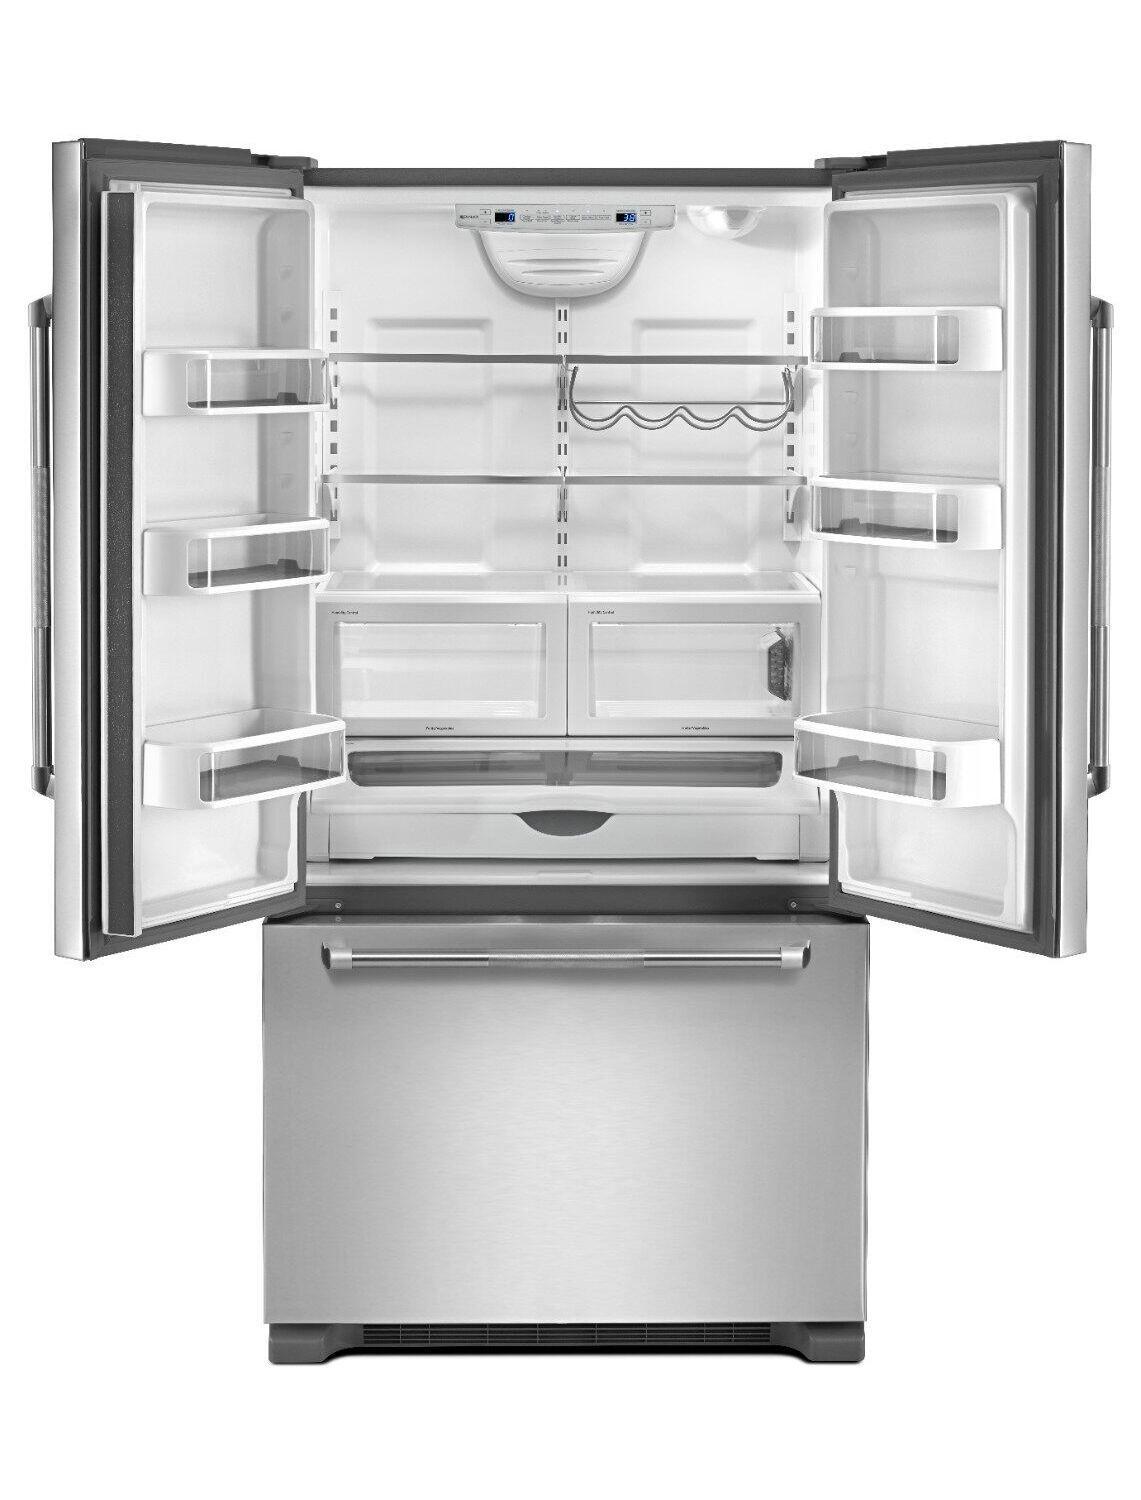 Jennair JFC2290REP 72" Counter Depth French Door Refrigerator - Pro Style Stainless